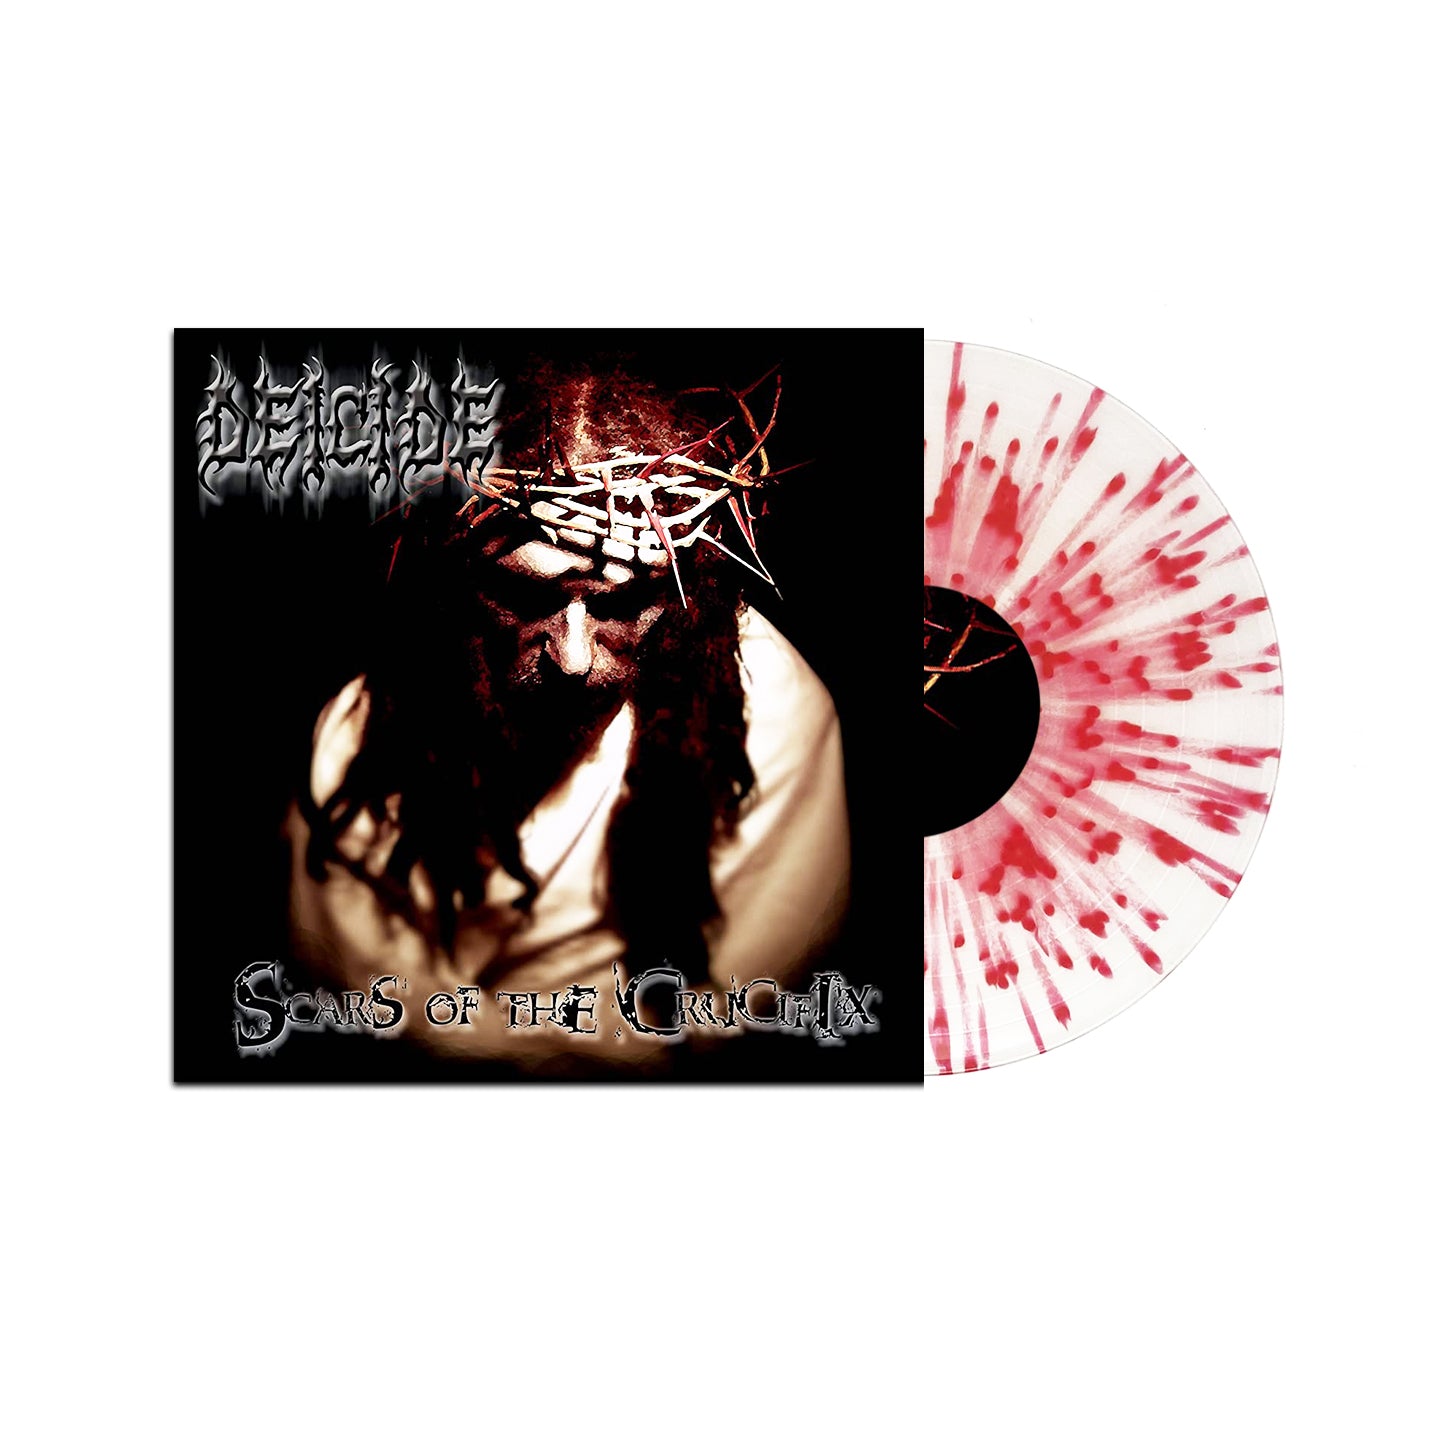 Deicide "Scars Of The Crucifix" White w/ Red Splatter Vinyl